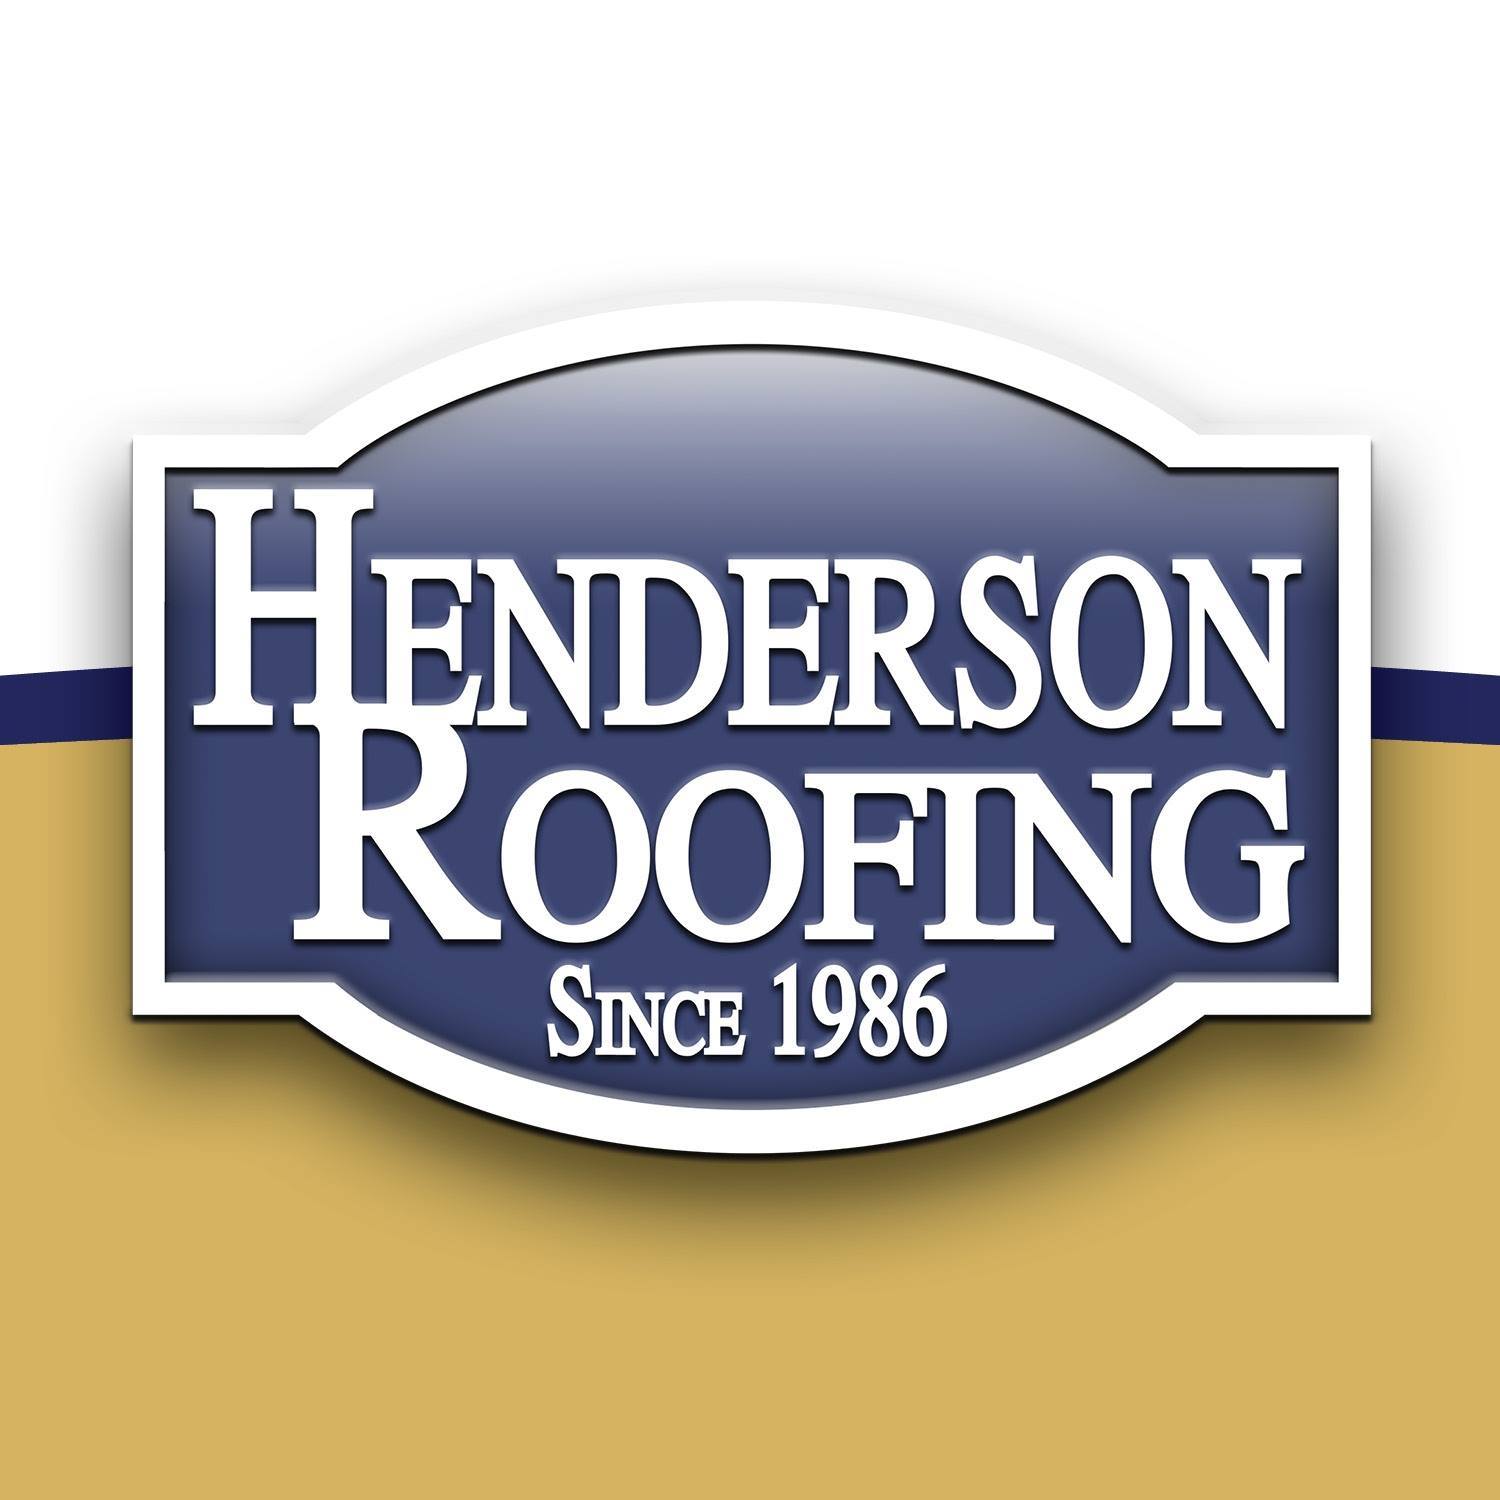 Henderson Roofing, Inc